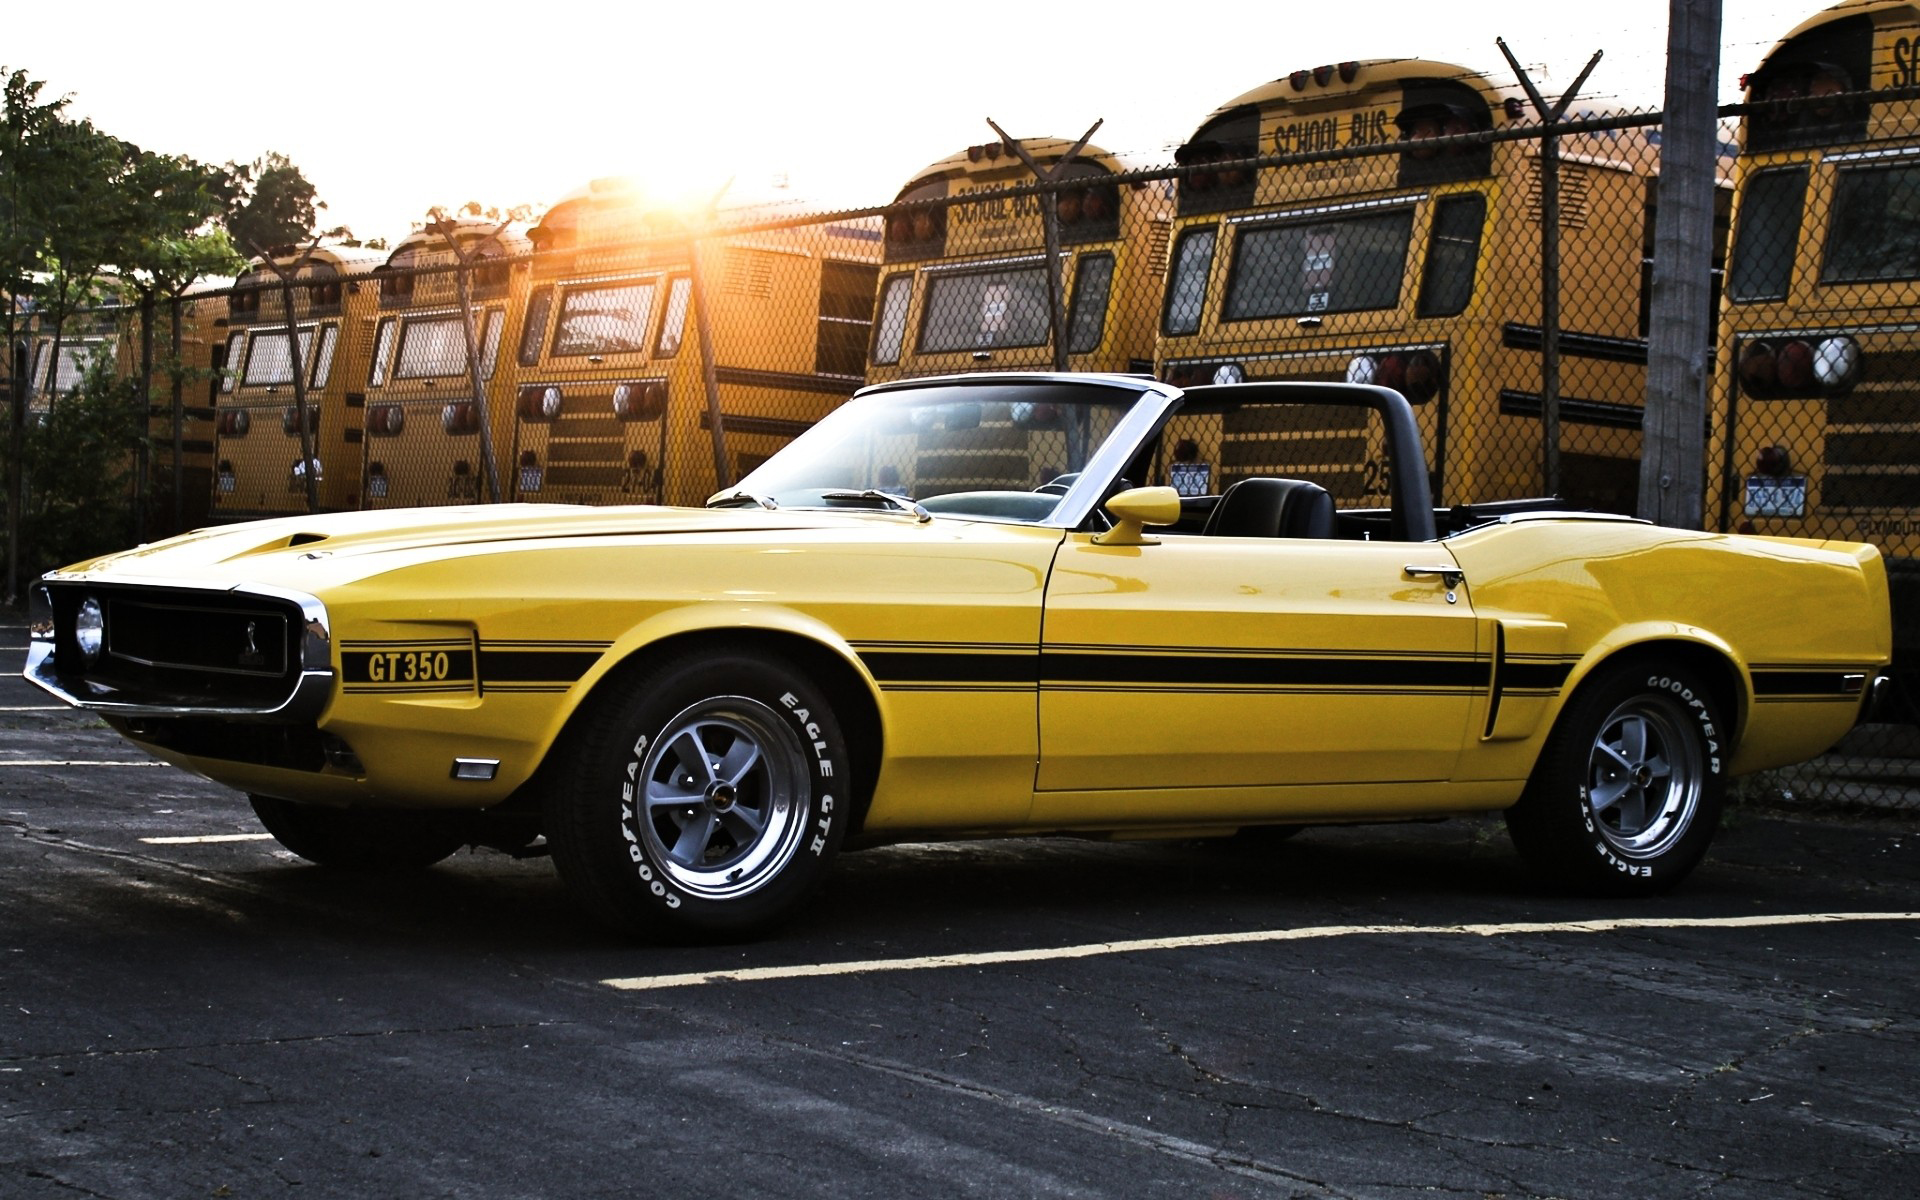 convertible, vehicles, ford shelby gt350, muscle car, yellow car, ford